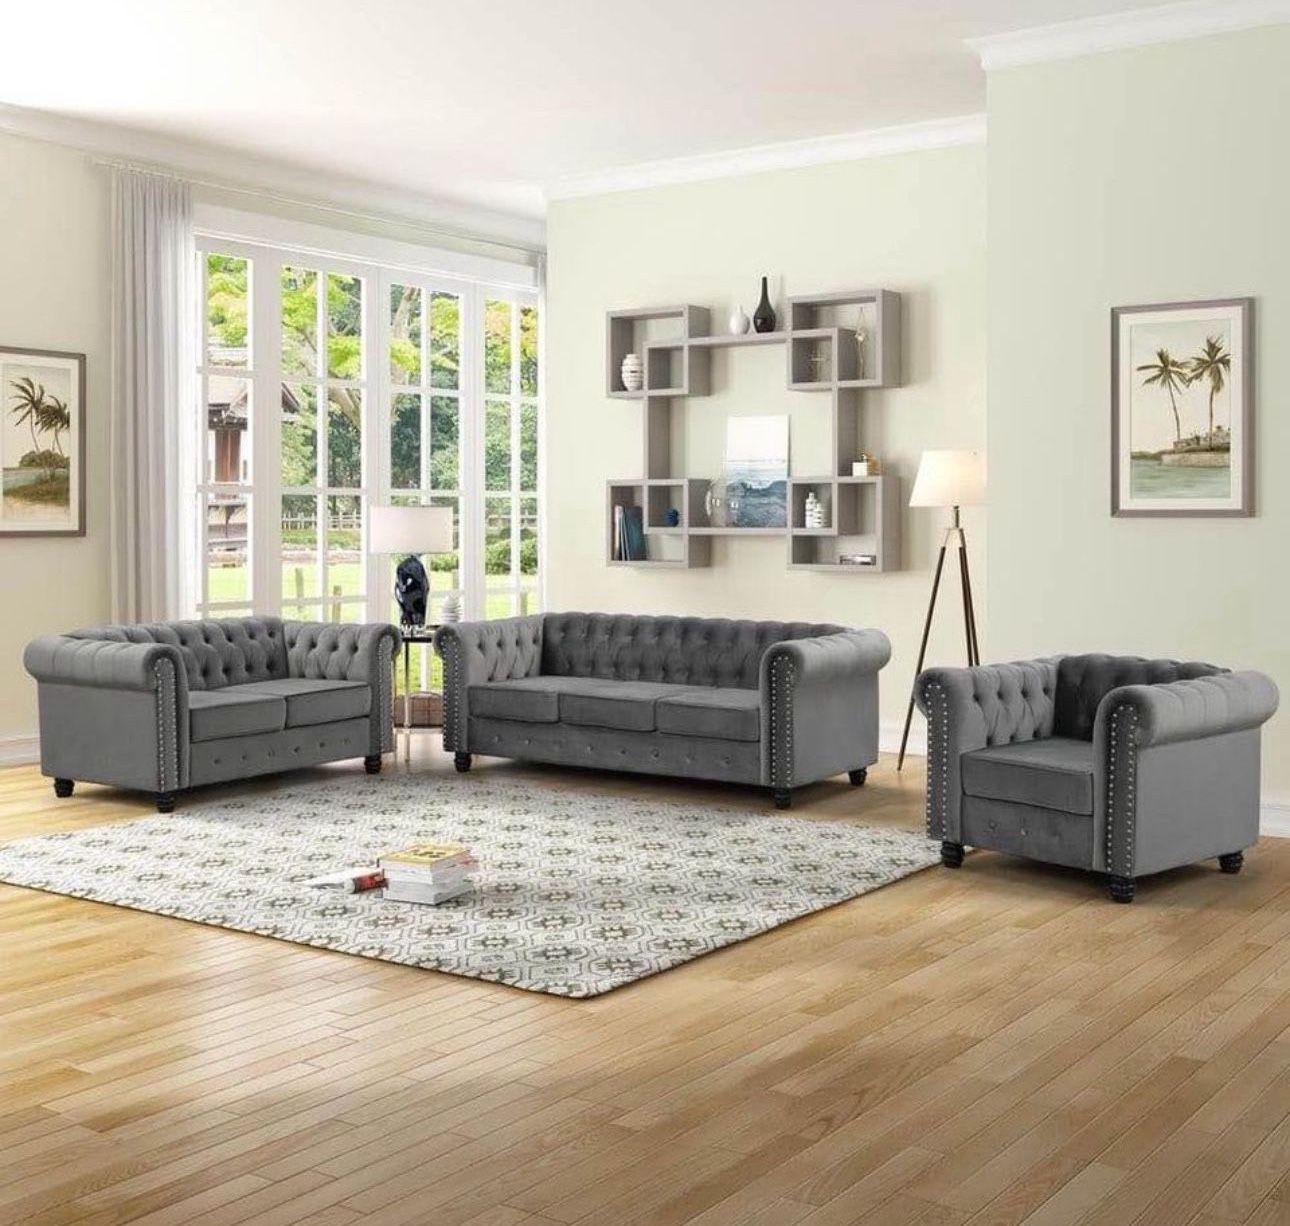 Chesterfield Furniture Sets 3 pieces - Velvet Grey，sofa Loveseat And Chair , Couches 